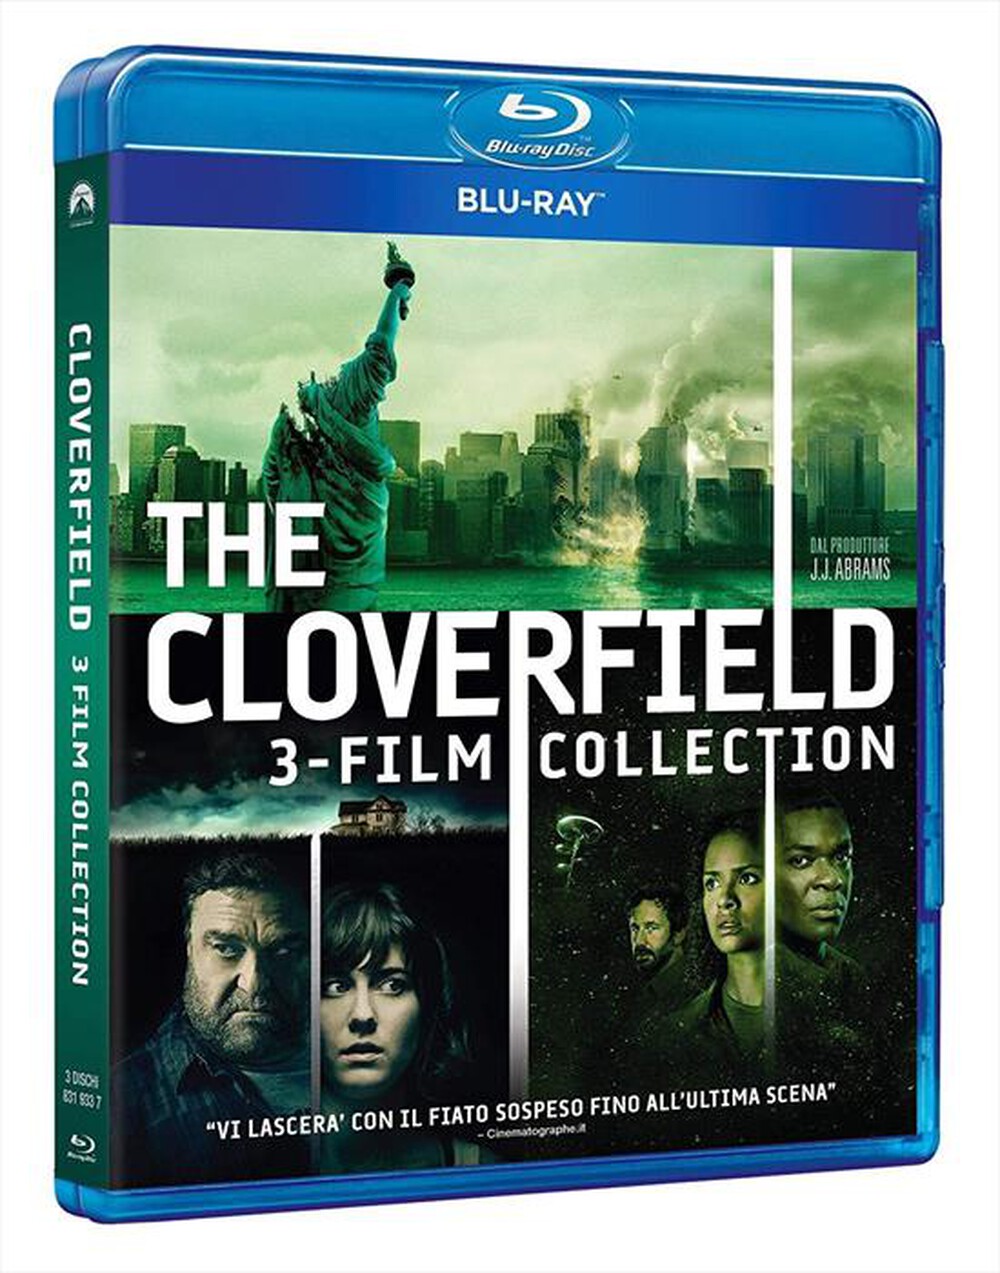 "PARAMOUNT PICTURE - Cloverfield (The) - 3 Film Collection (3 Blu-Ray)"